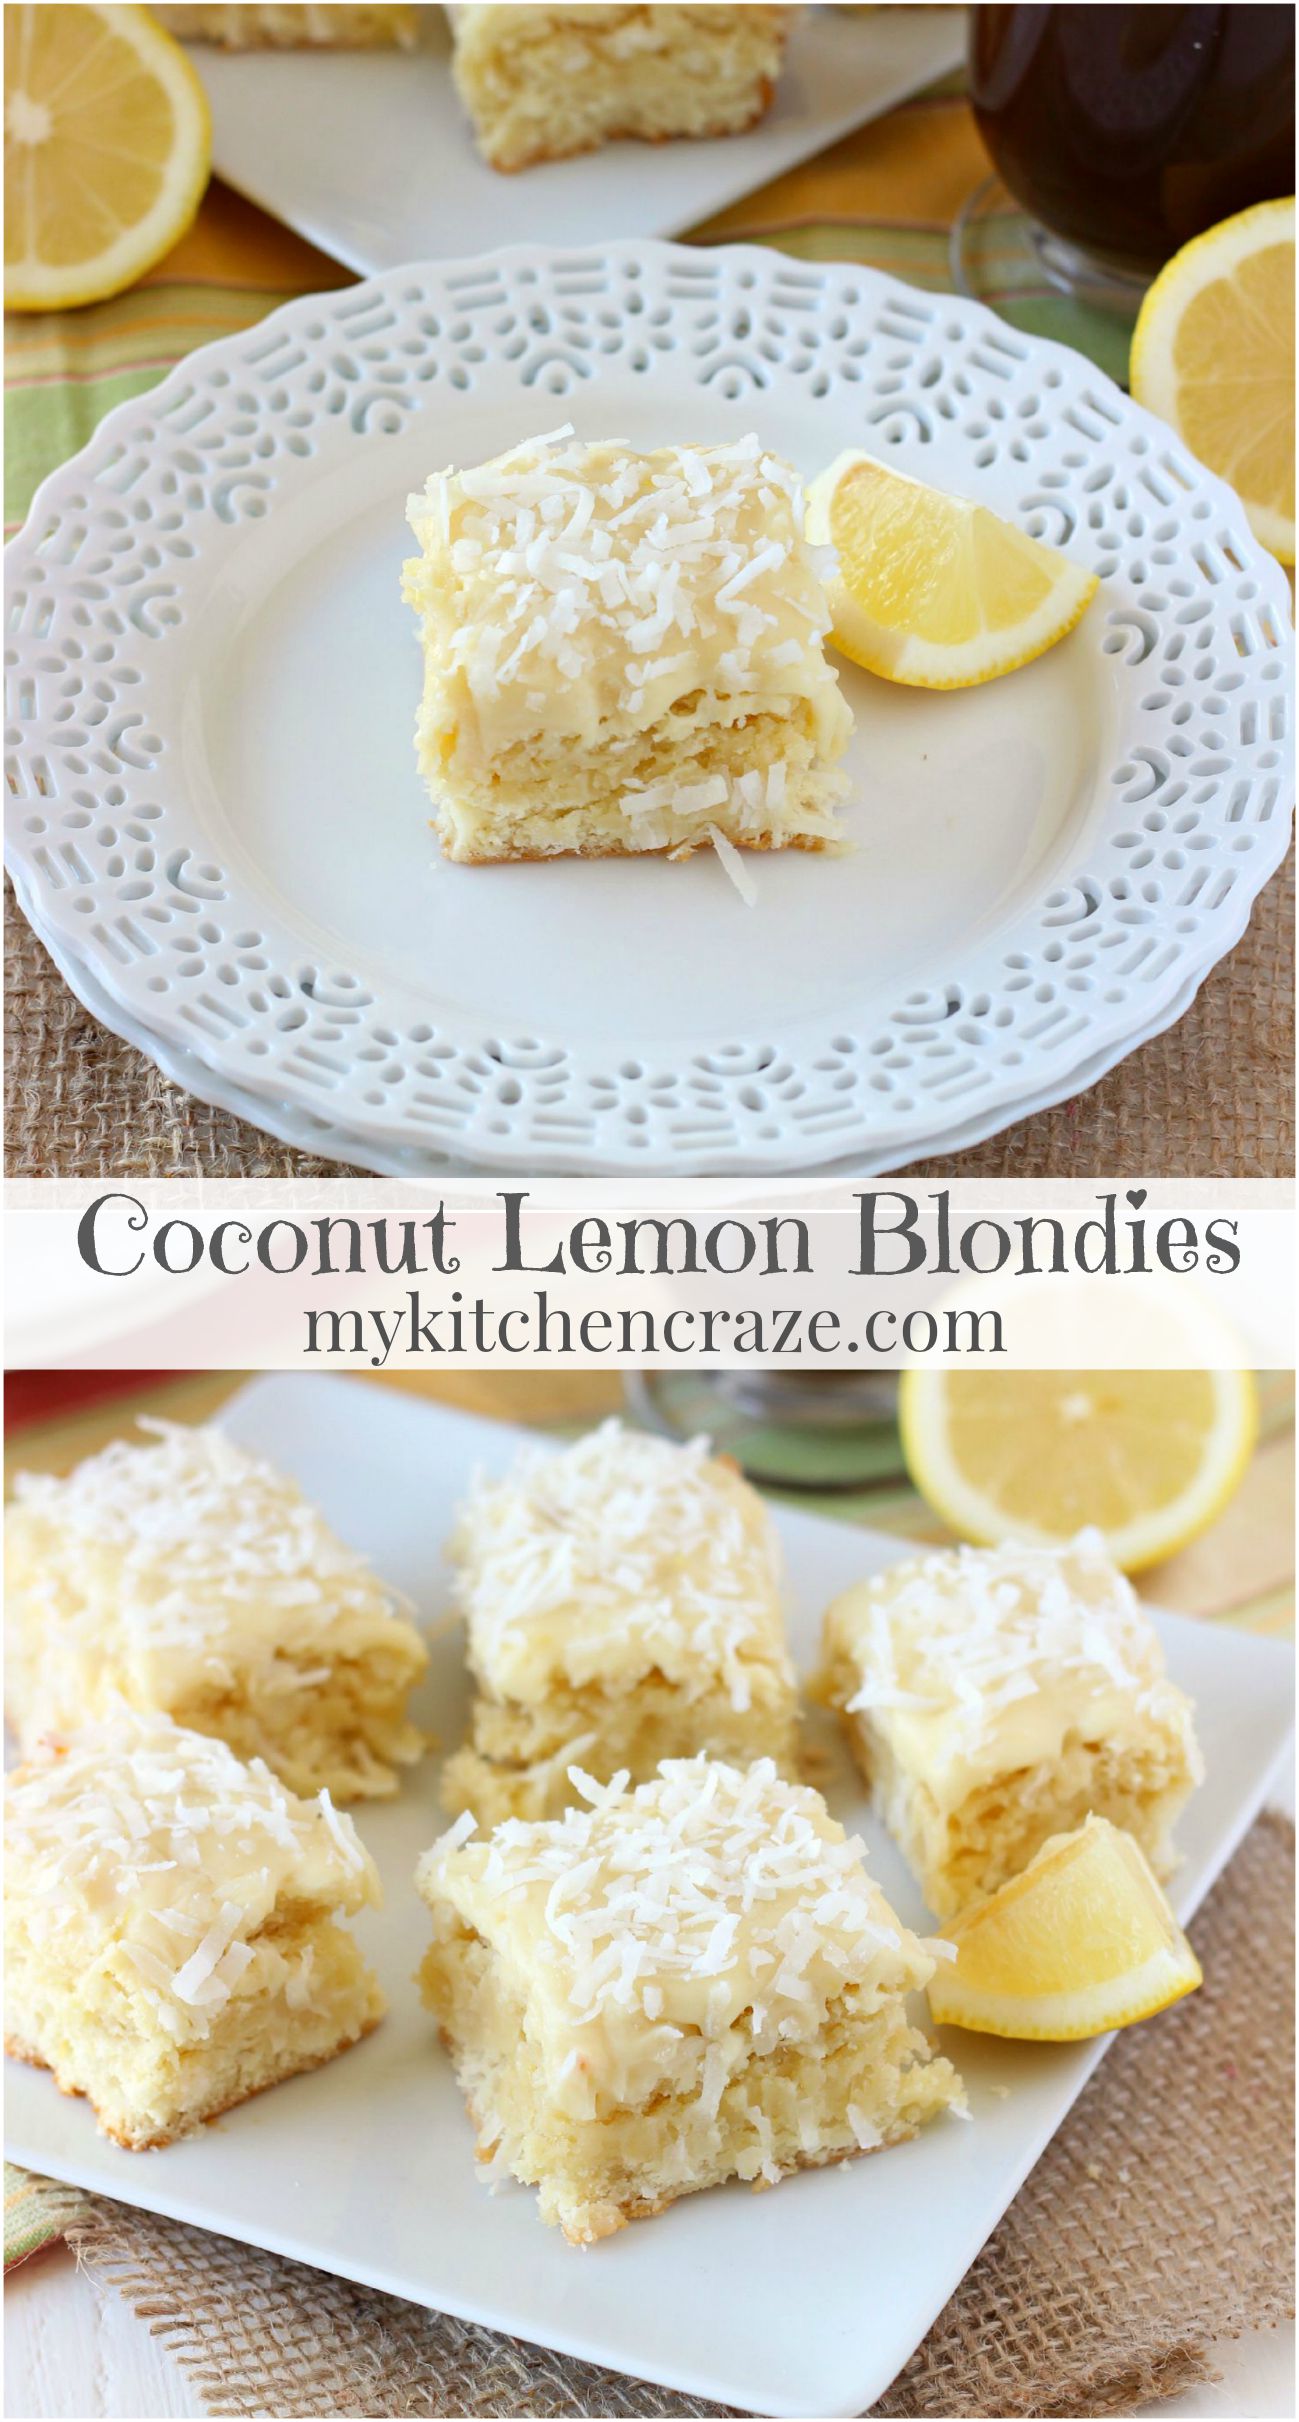 Coconut Lemon Blondies ~ mykitchencraze.com ~ Moist and flavorful coconut lemon blondies, frosted with a creamy white chocolate frosting. These blondies are great for any get together or just because. You'll love them!